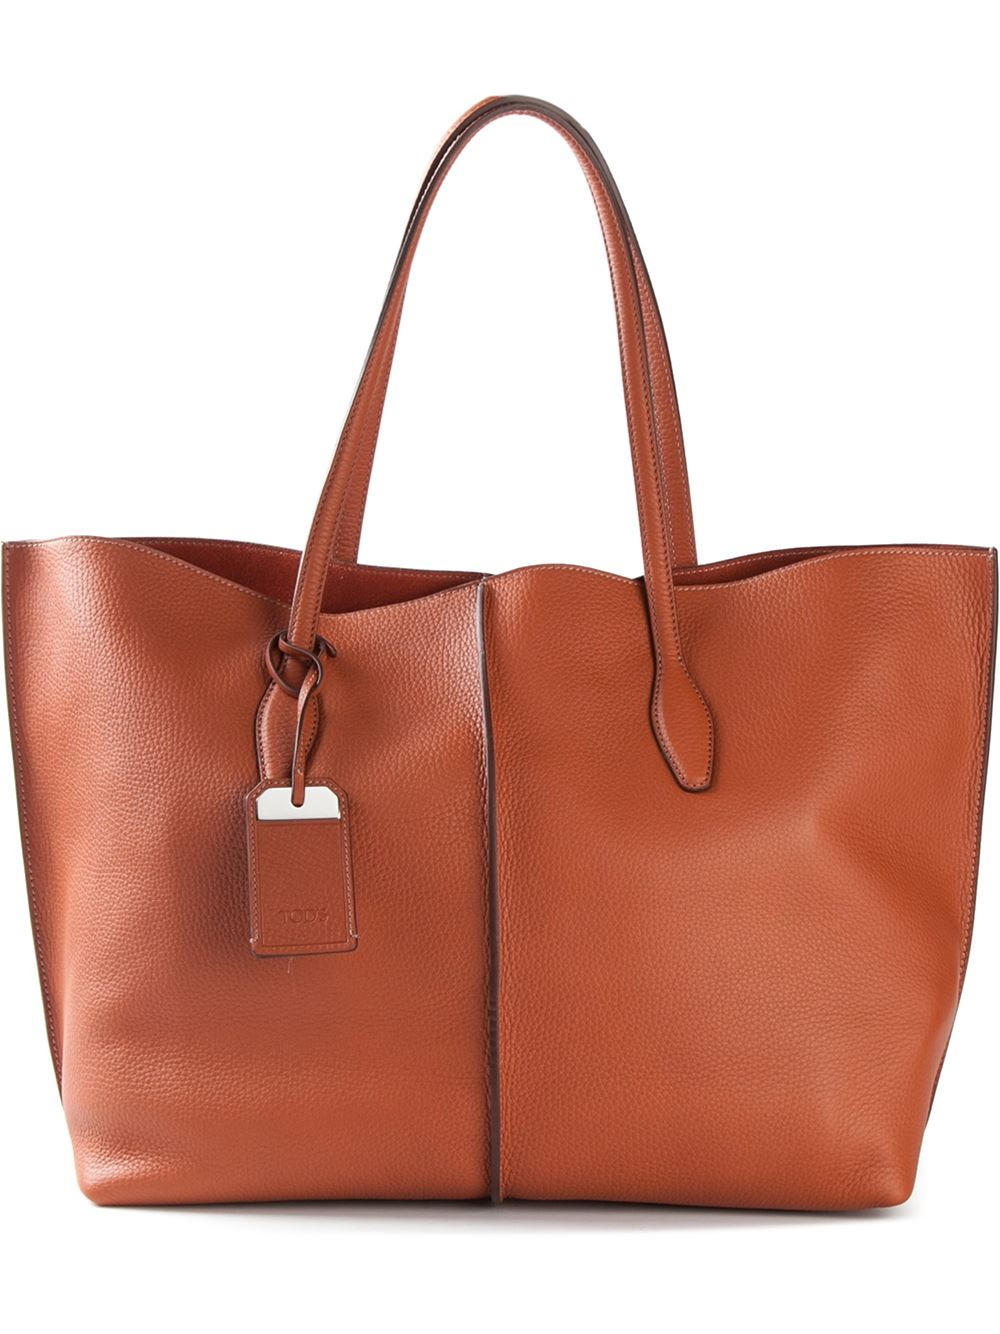 Tod's Joy Large Leather Tote in Brown - Lyst